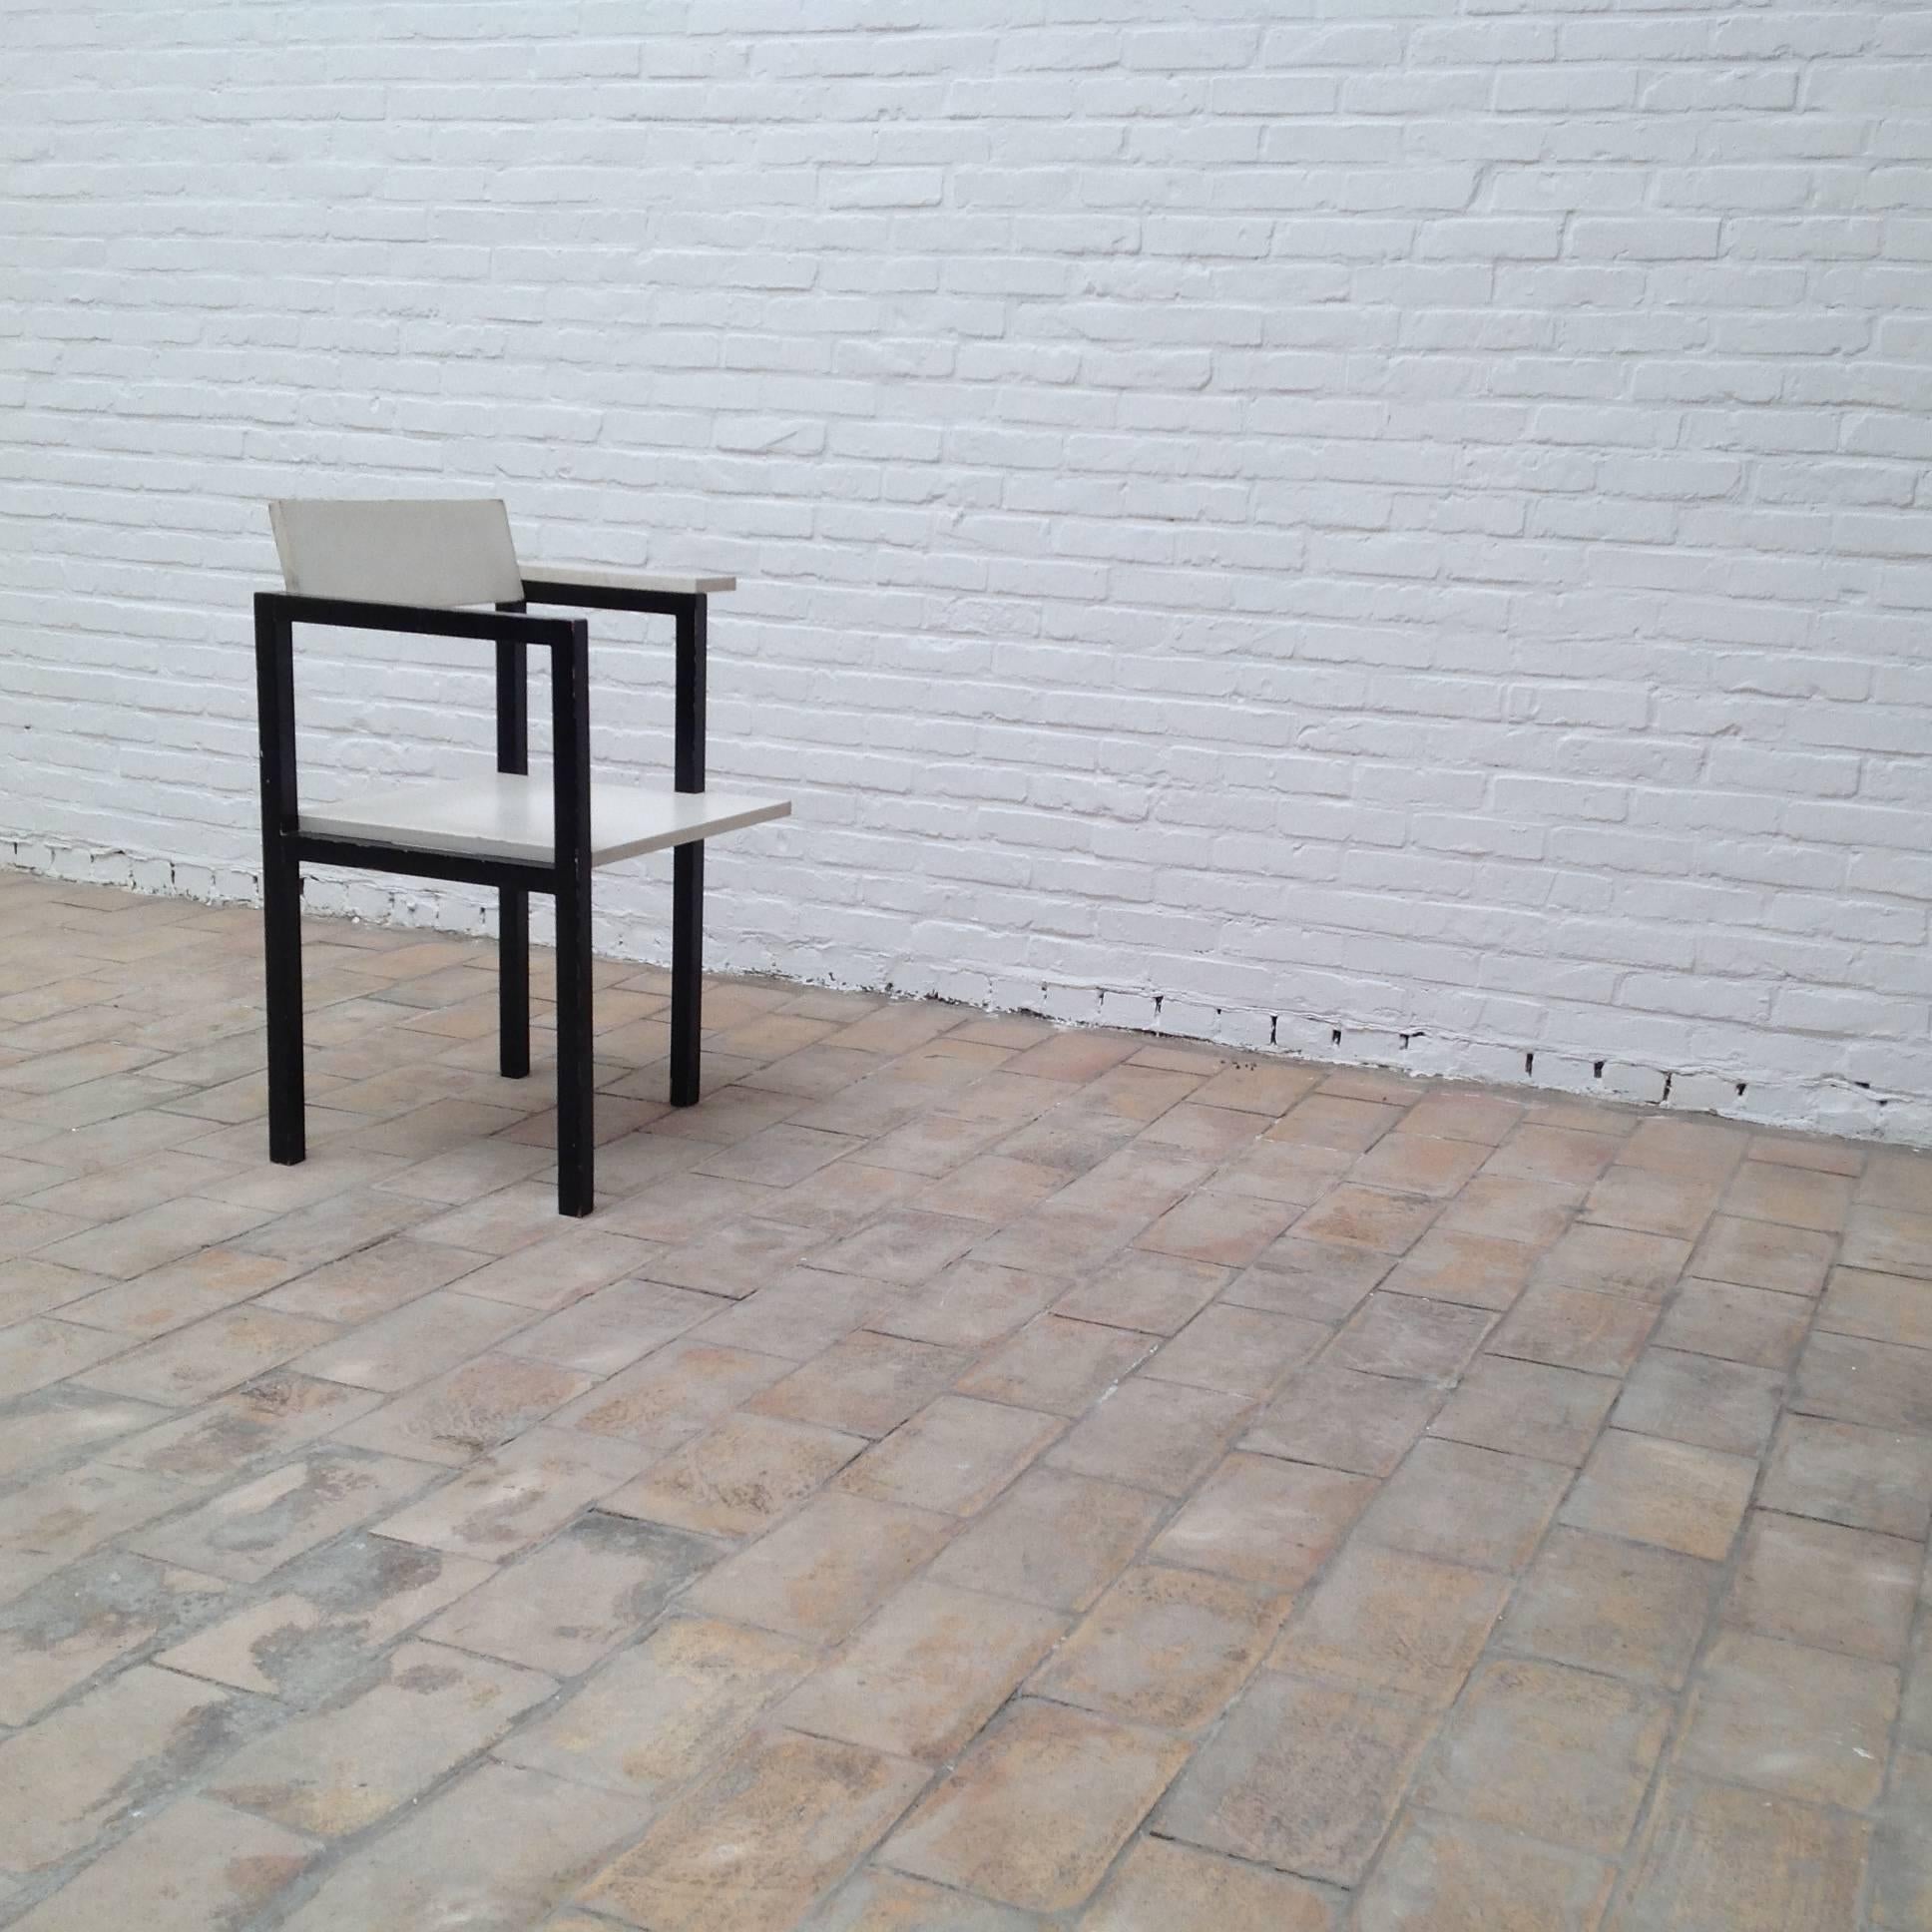 Very Rare and Unknown One-Off Chair by Gerrit Rietveld For Sale 2